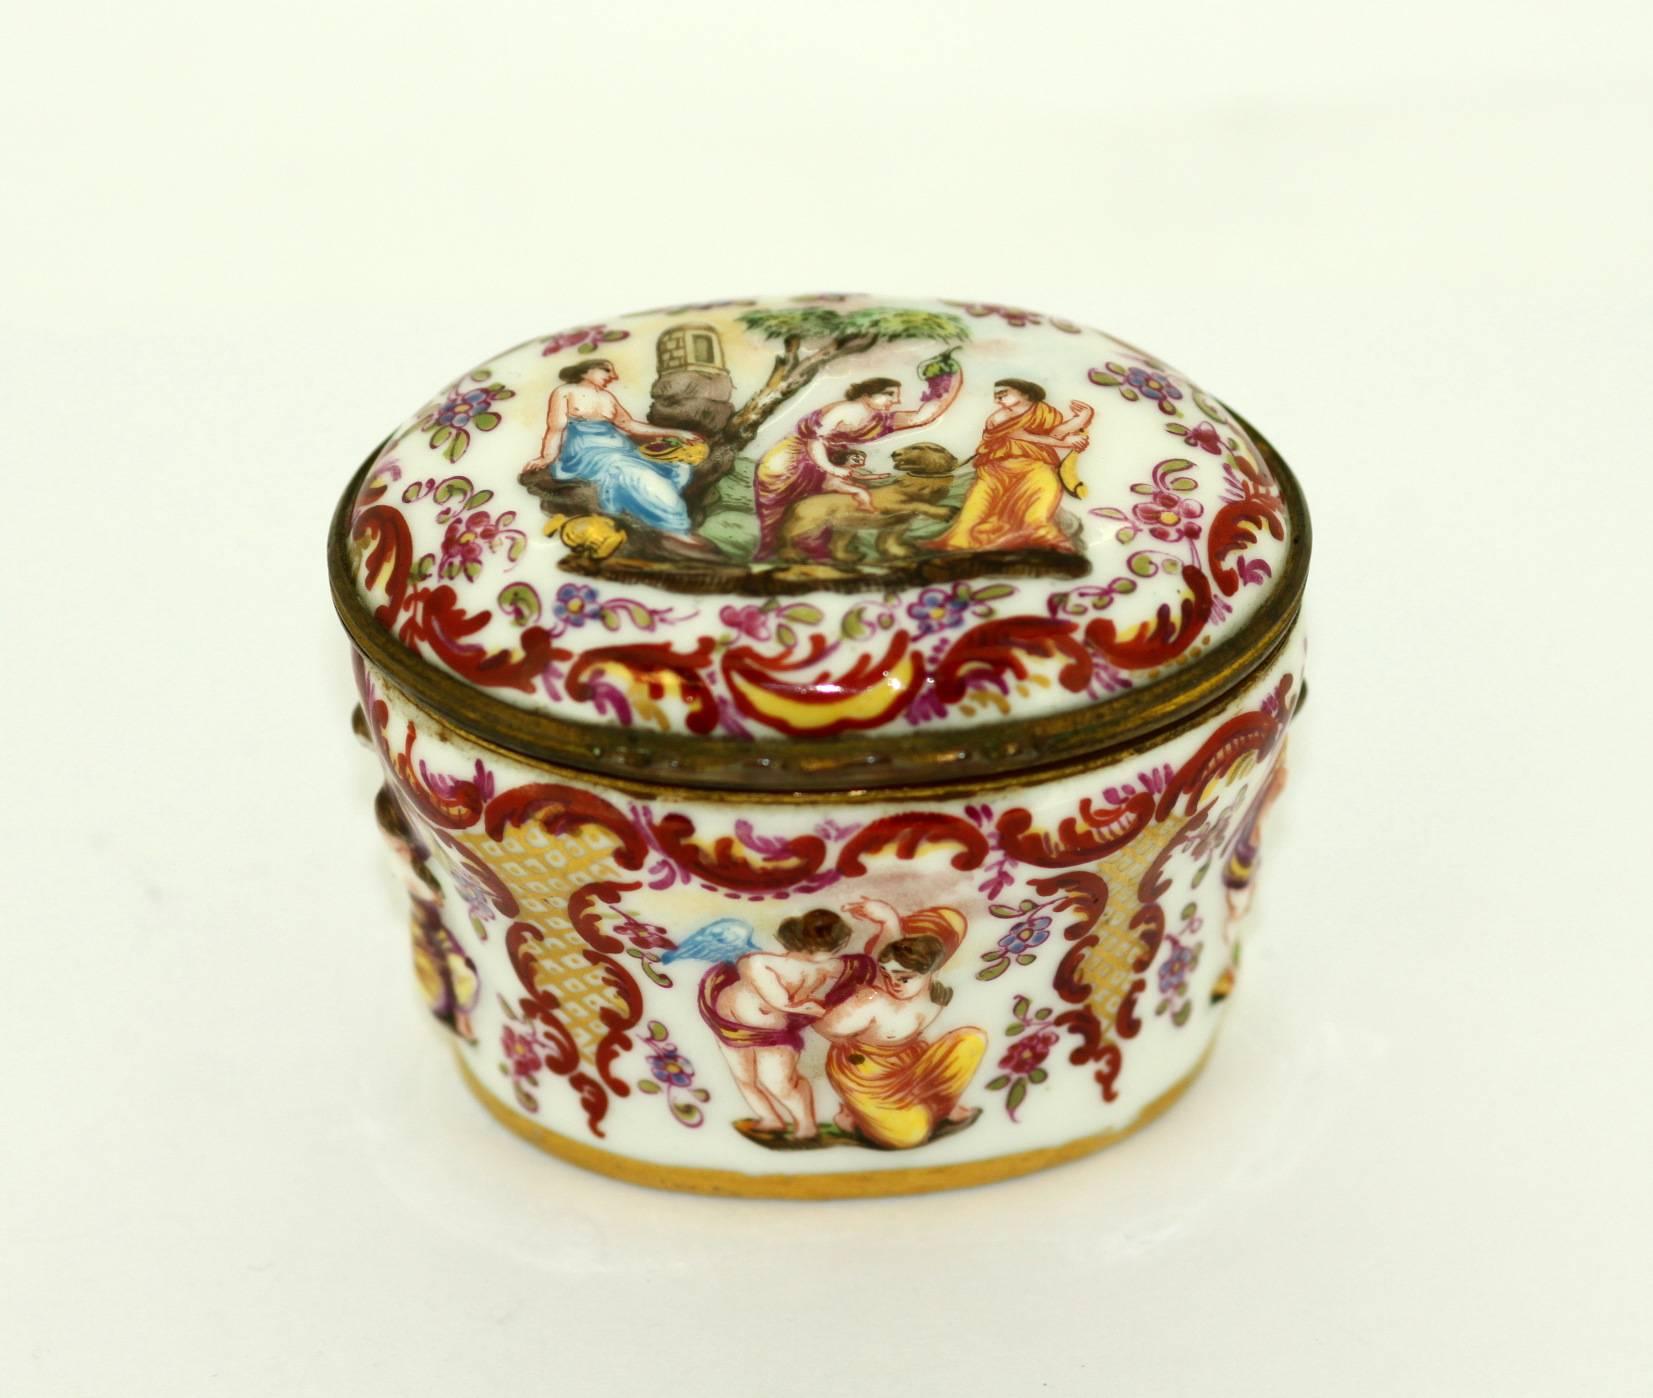 Antique Erotica Porcelain Jar With Lid, ornately decorated with gold and cherry red overlay and raised puttis figures in erotica scenery. The underside marking of the capital N under a four pronged crown and the country of Germany date these to